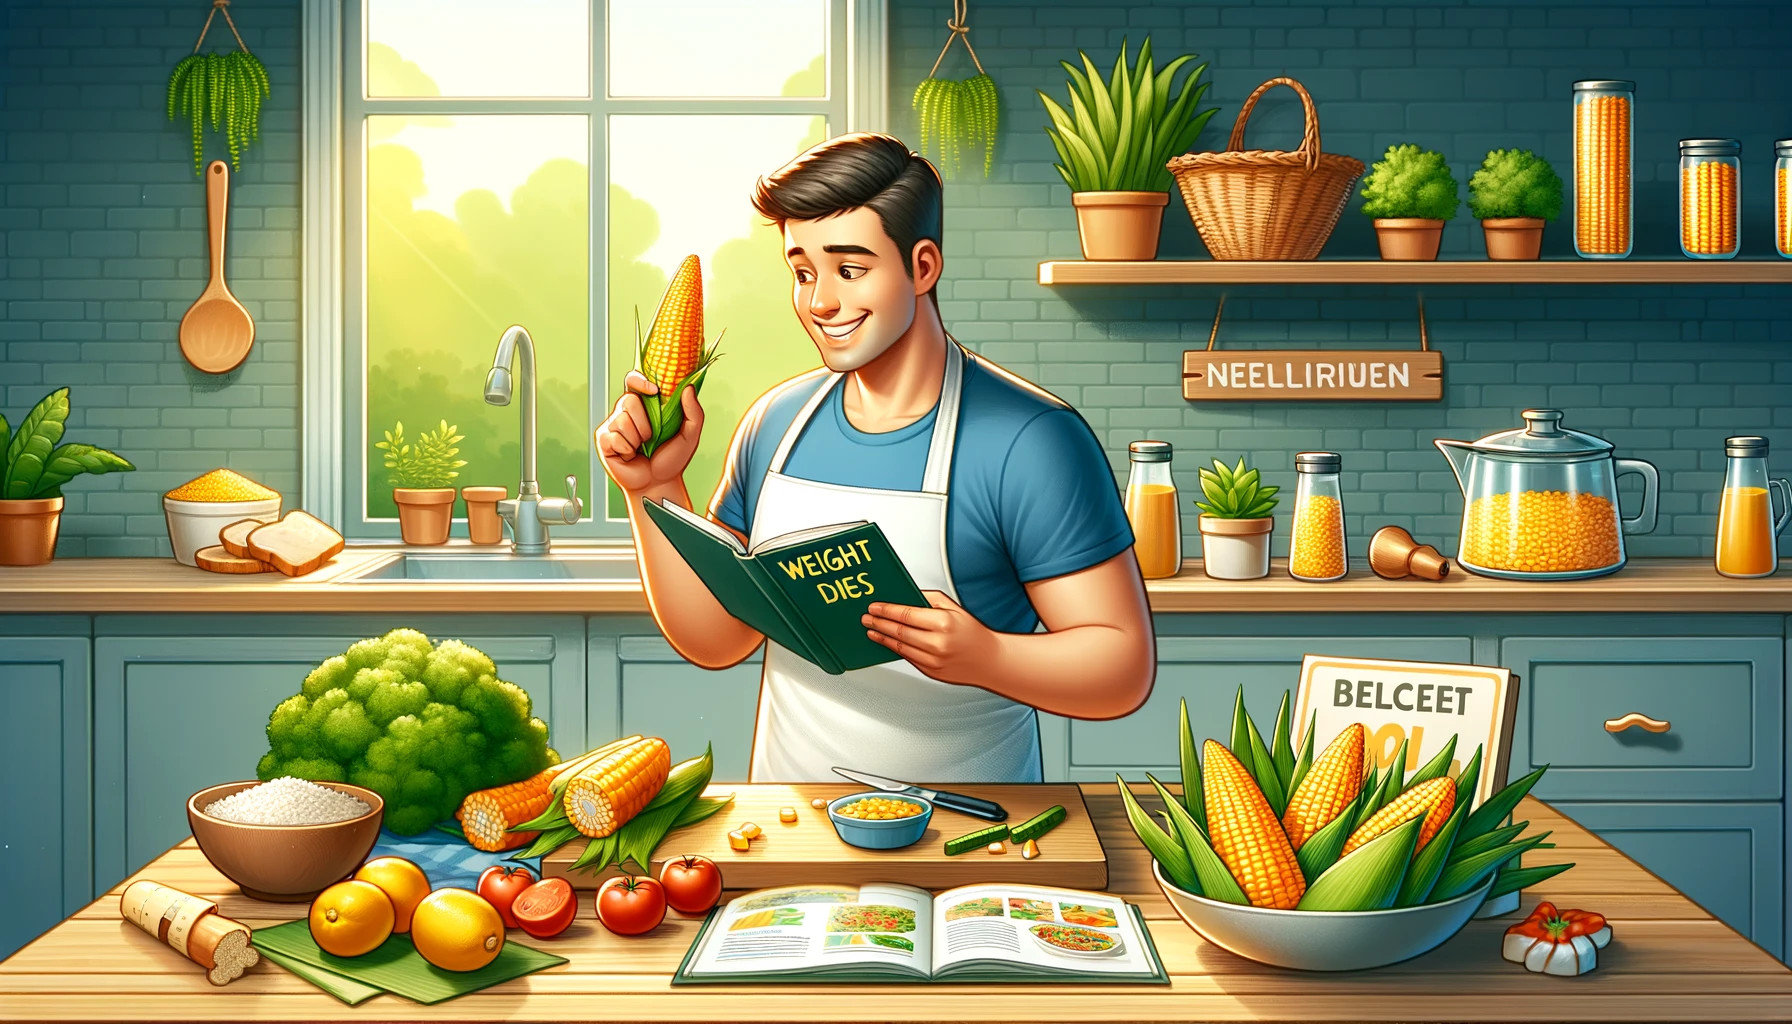 A person happily selecting corn as part of their balanced diet for weight loss, preparing a meal with healthy ingredients.